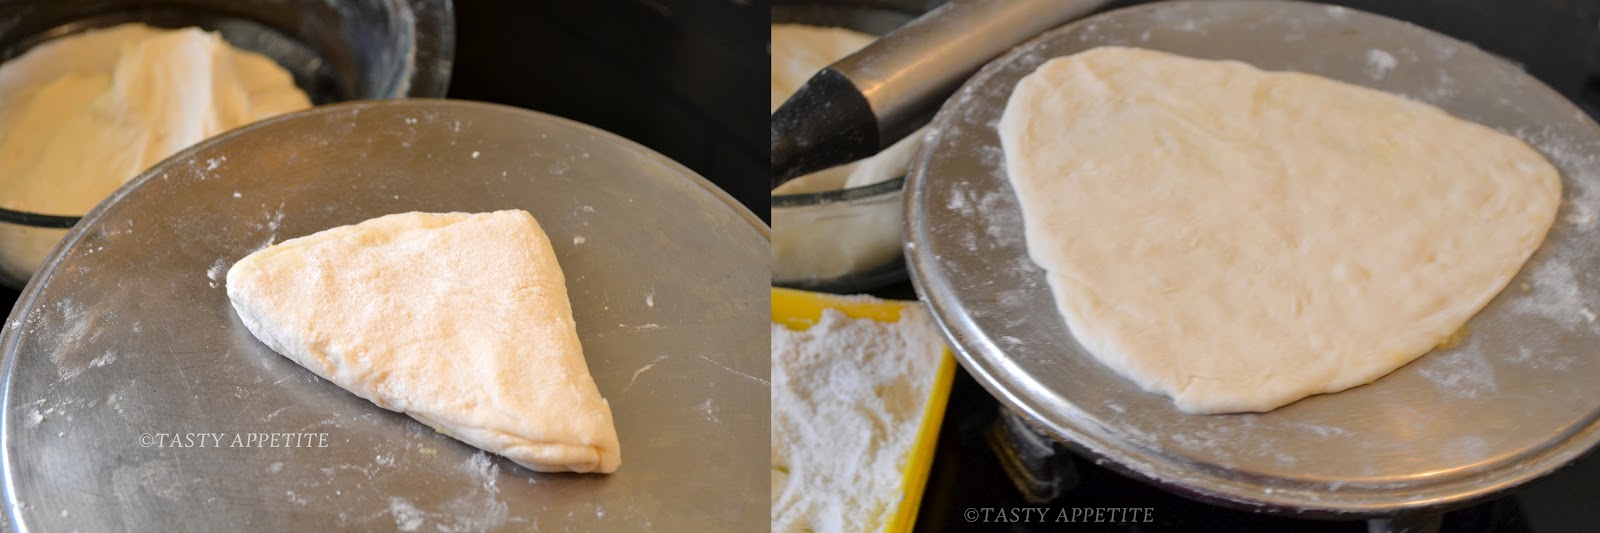 make video home: at  How naan to at make Butter butter how to Naan / Naan home